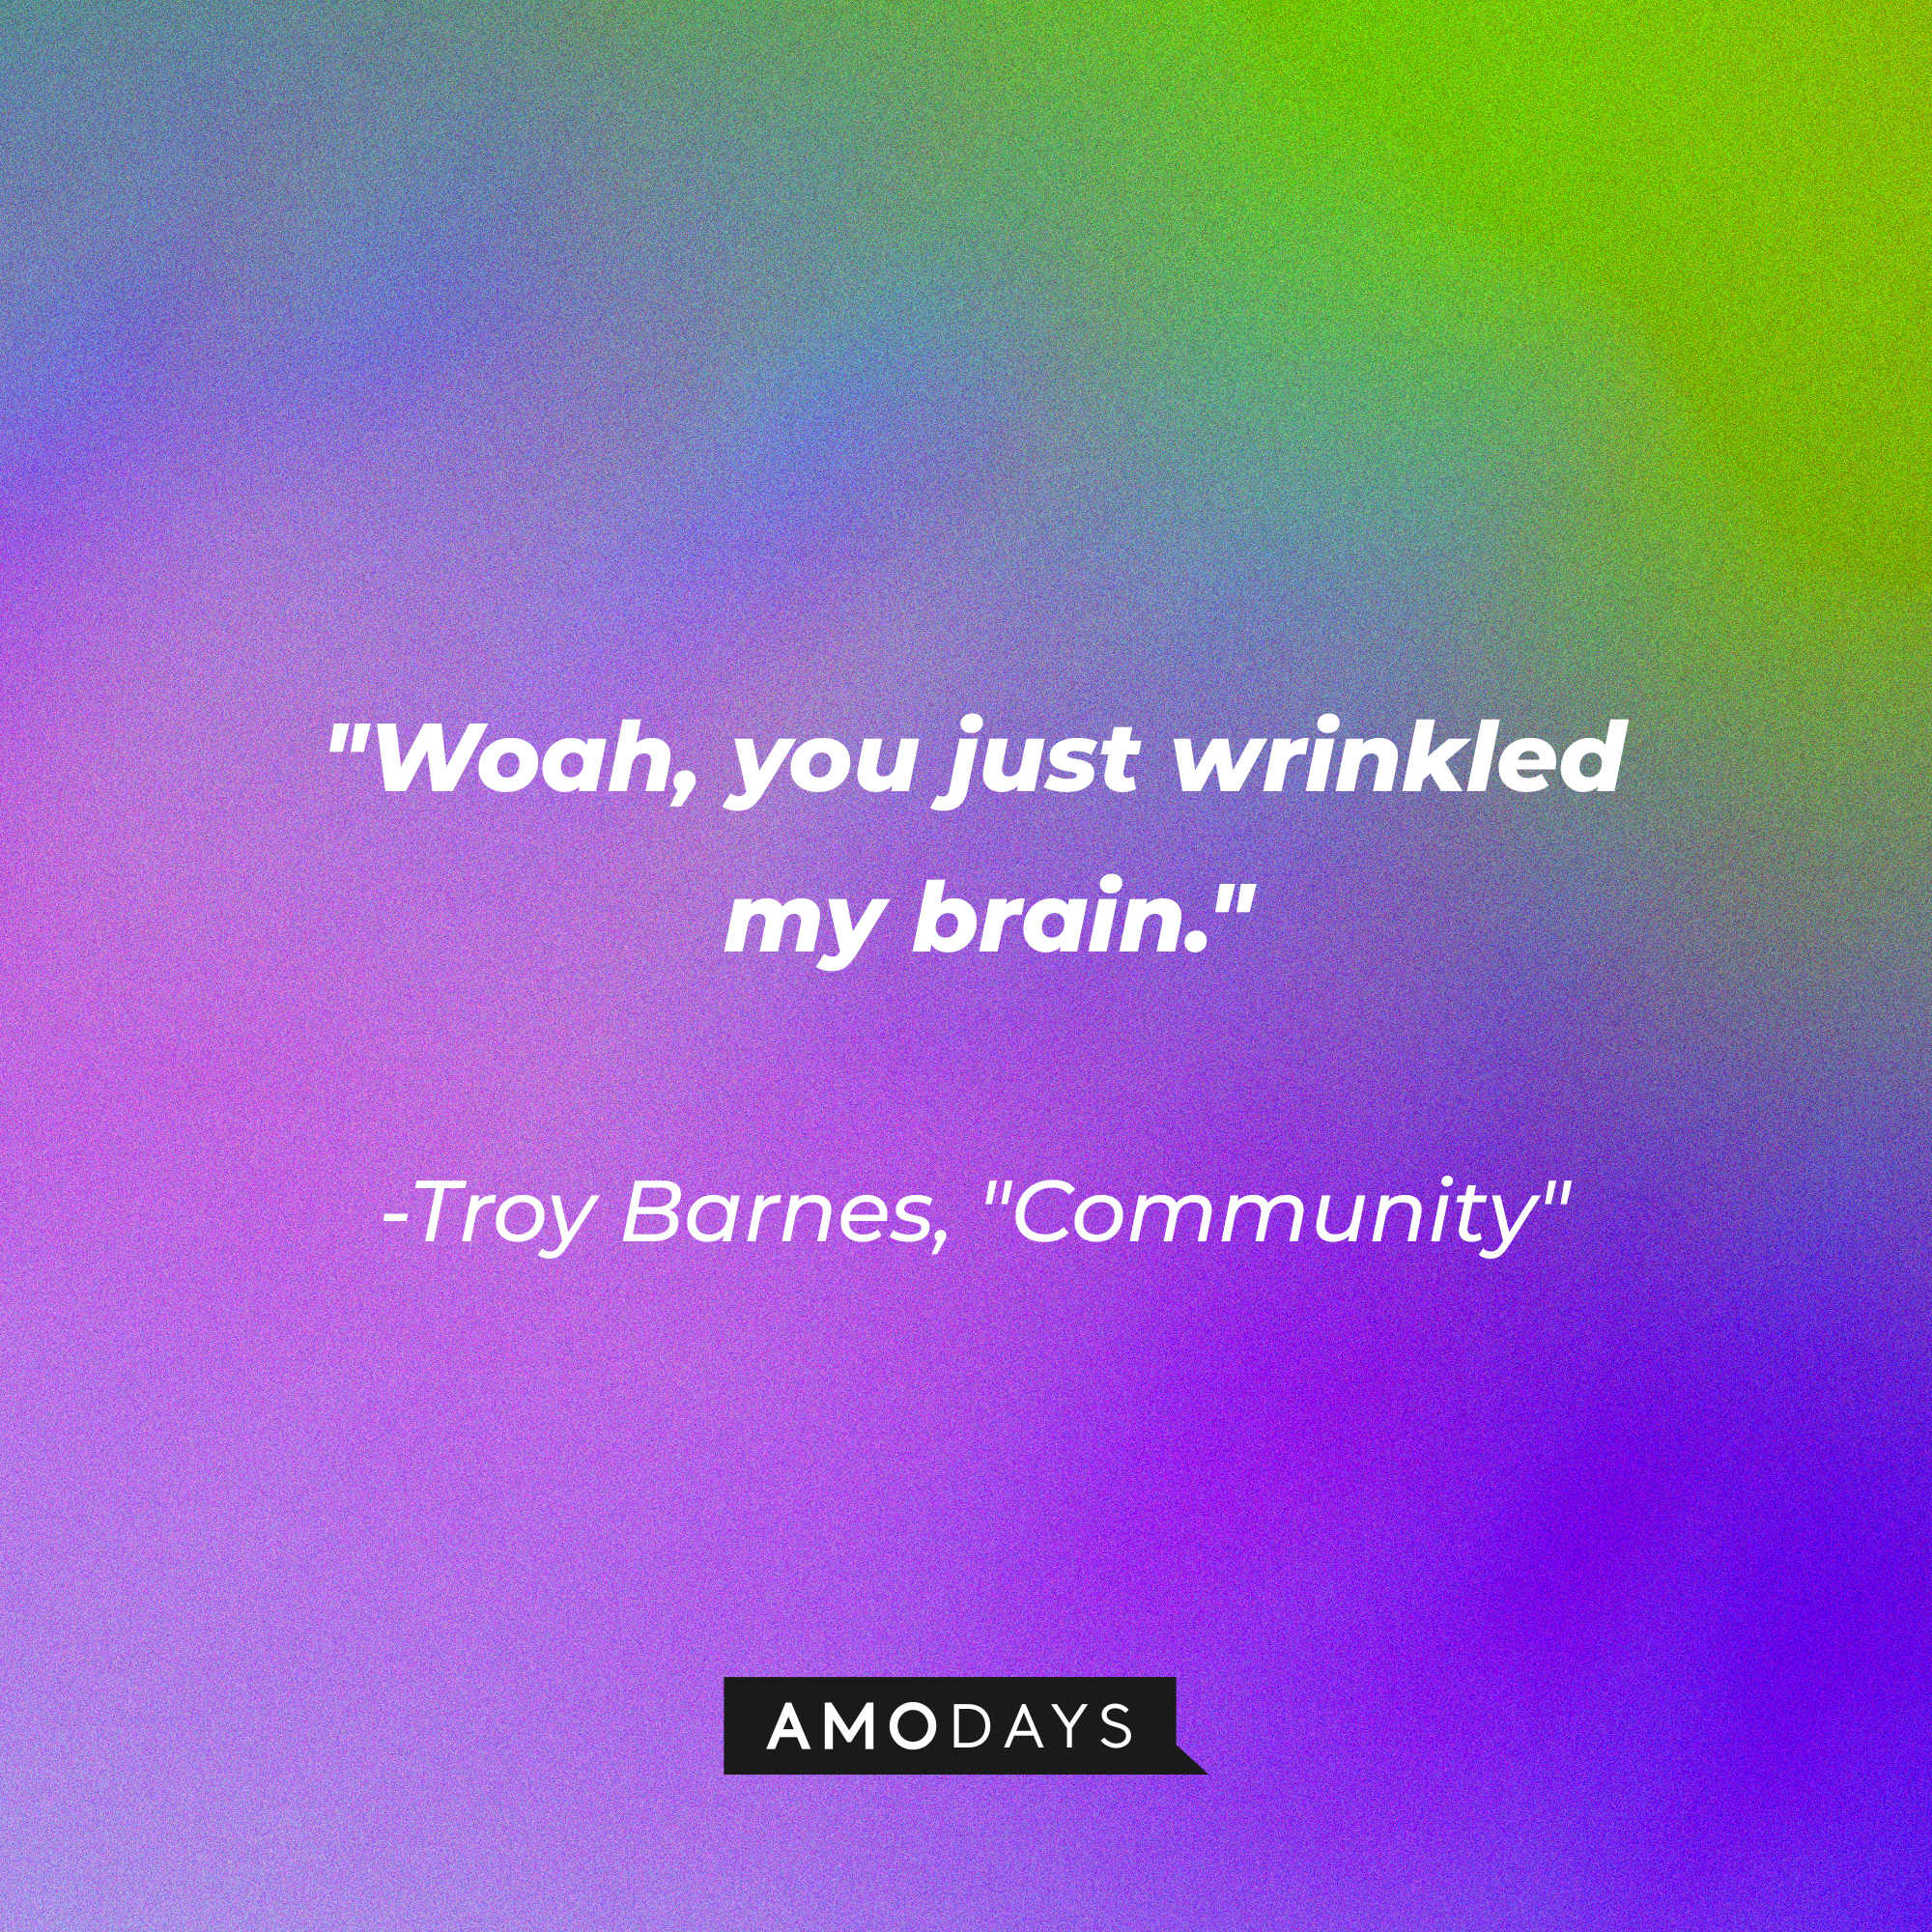 Troy Barnes' quote: "Woah, you just wrinkled my brain." | Source: Amodays